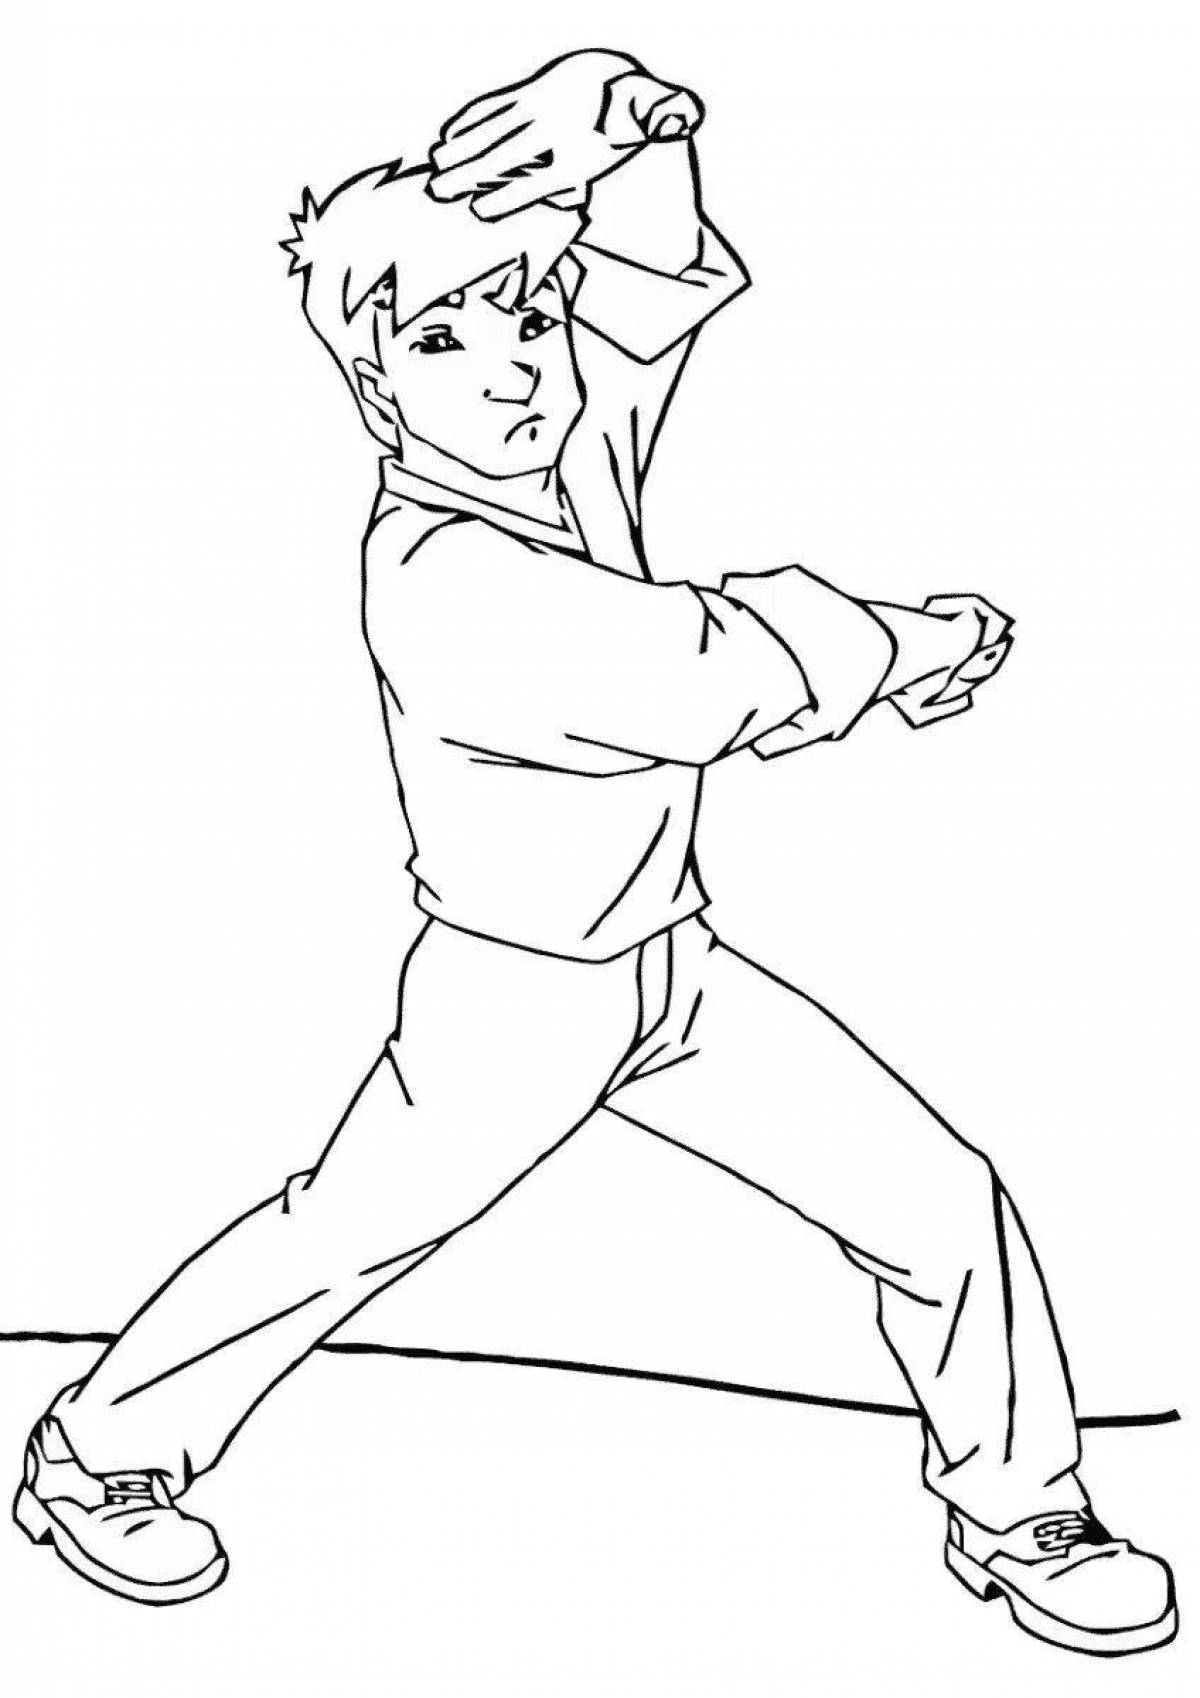 Jackie Chan's vibrant coloring page